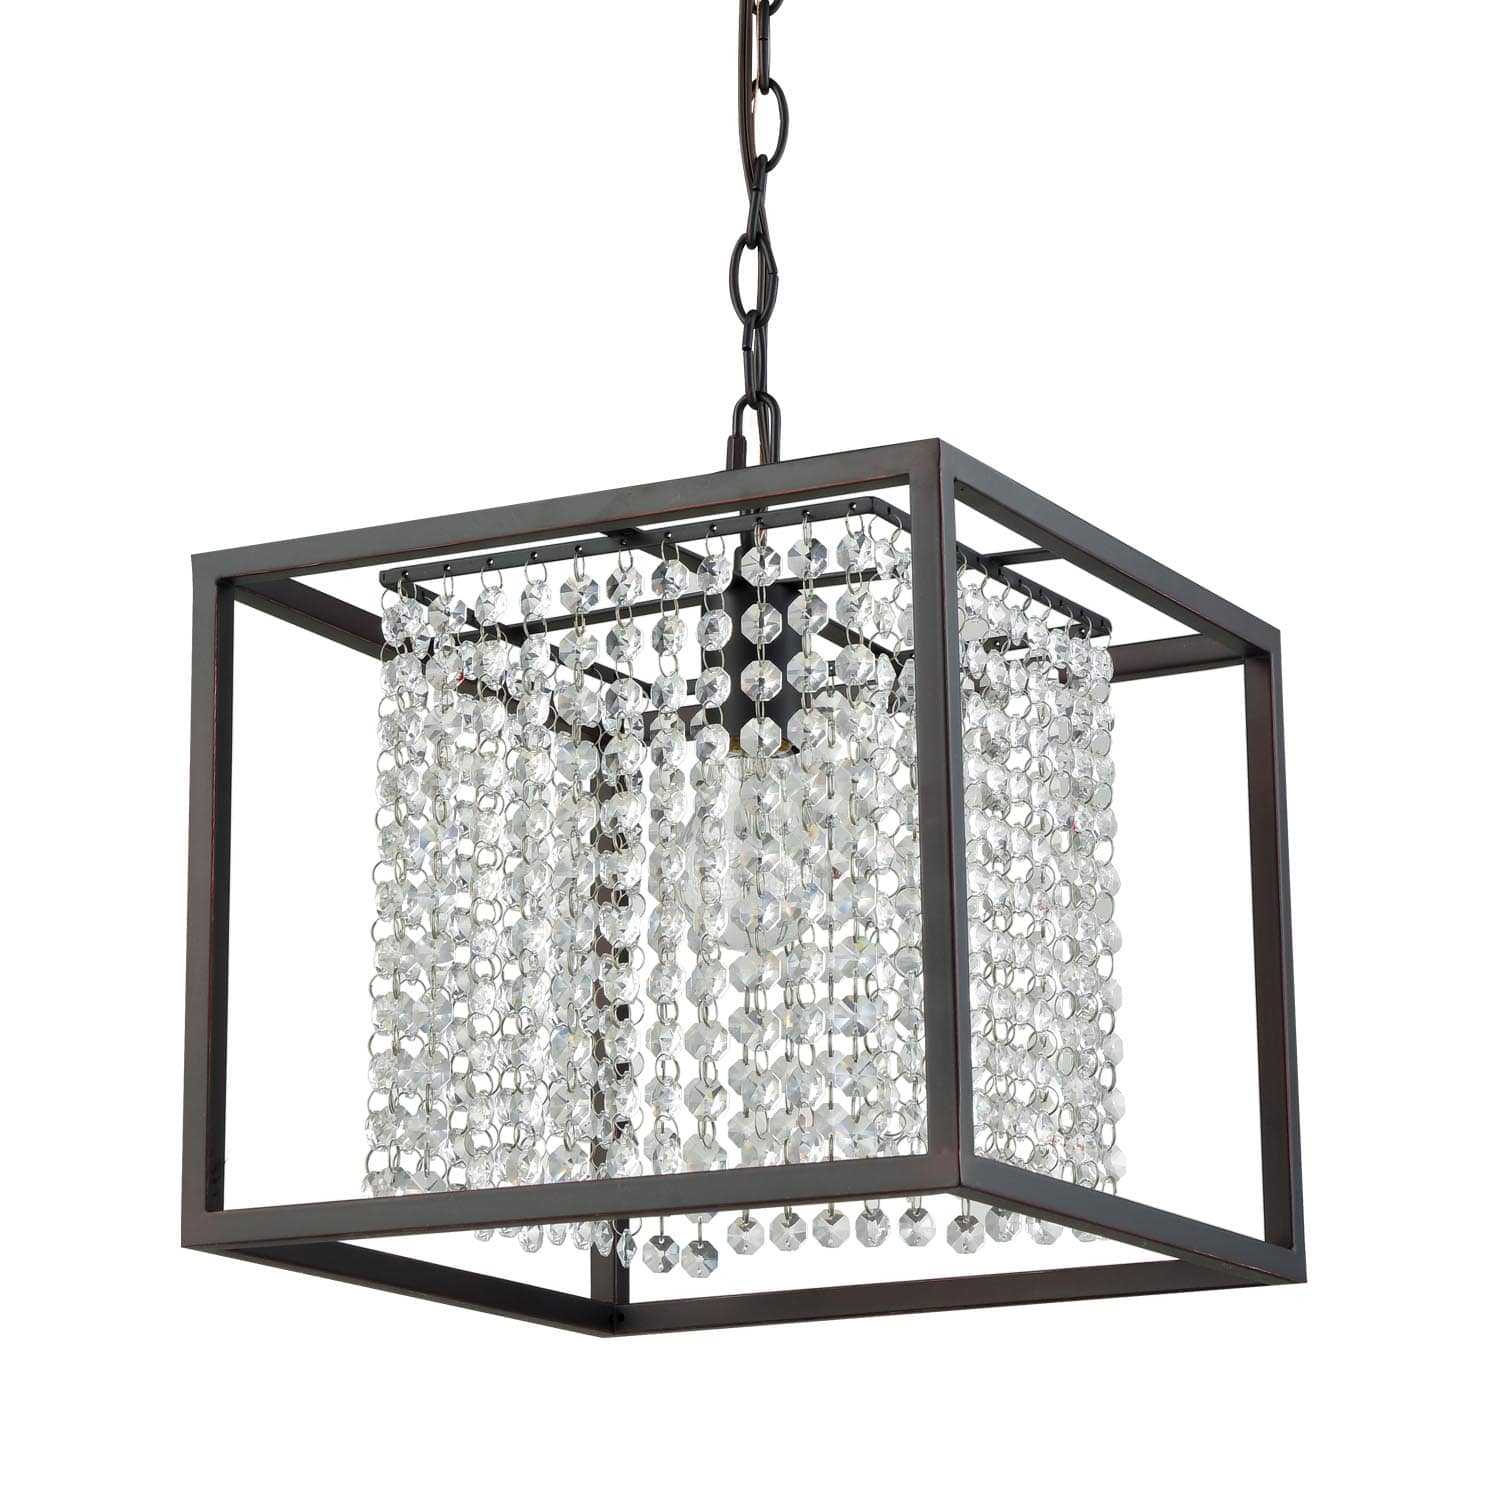 Crystal Pendant Chandelier for Dining Room with Black Metal Cube